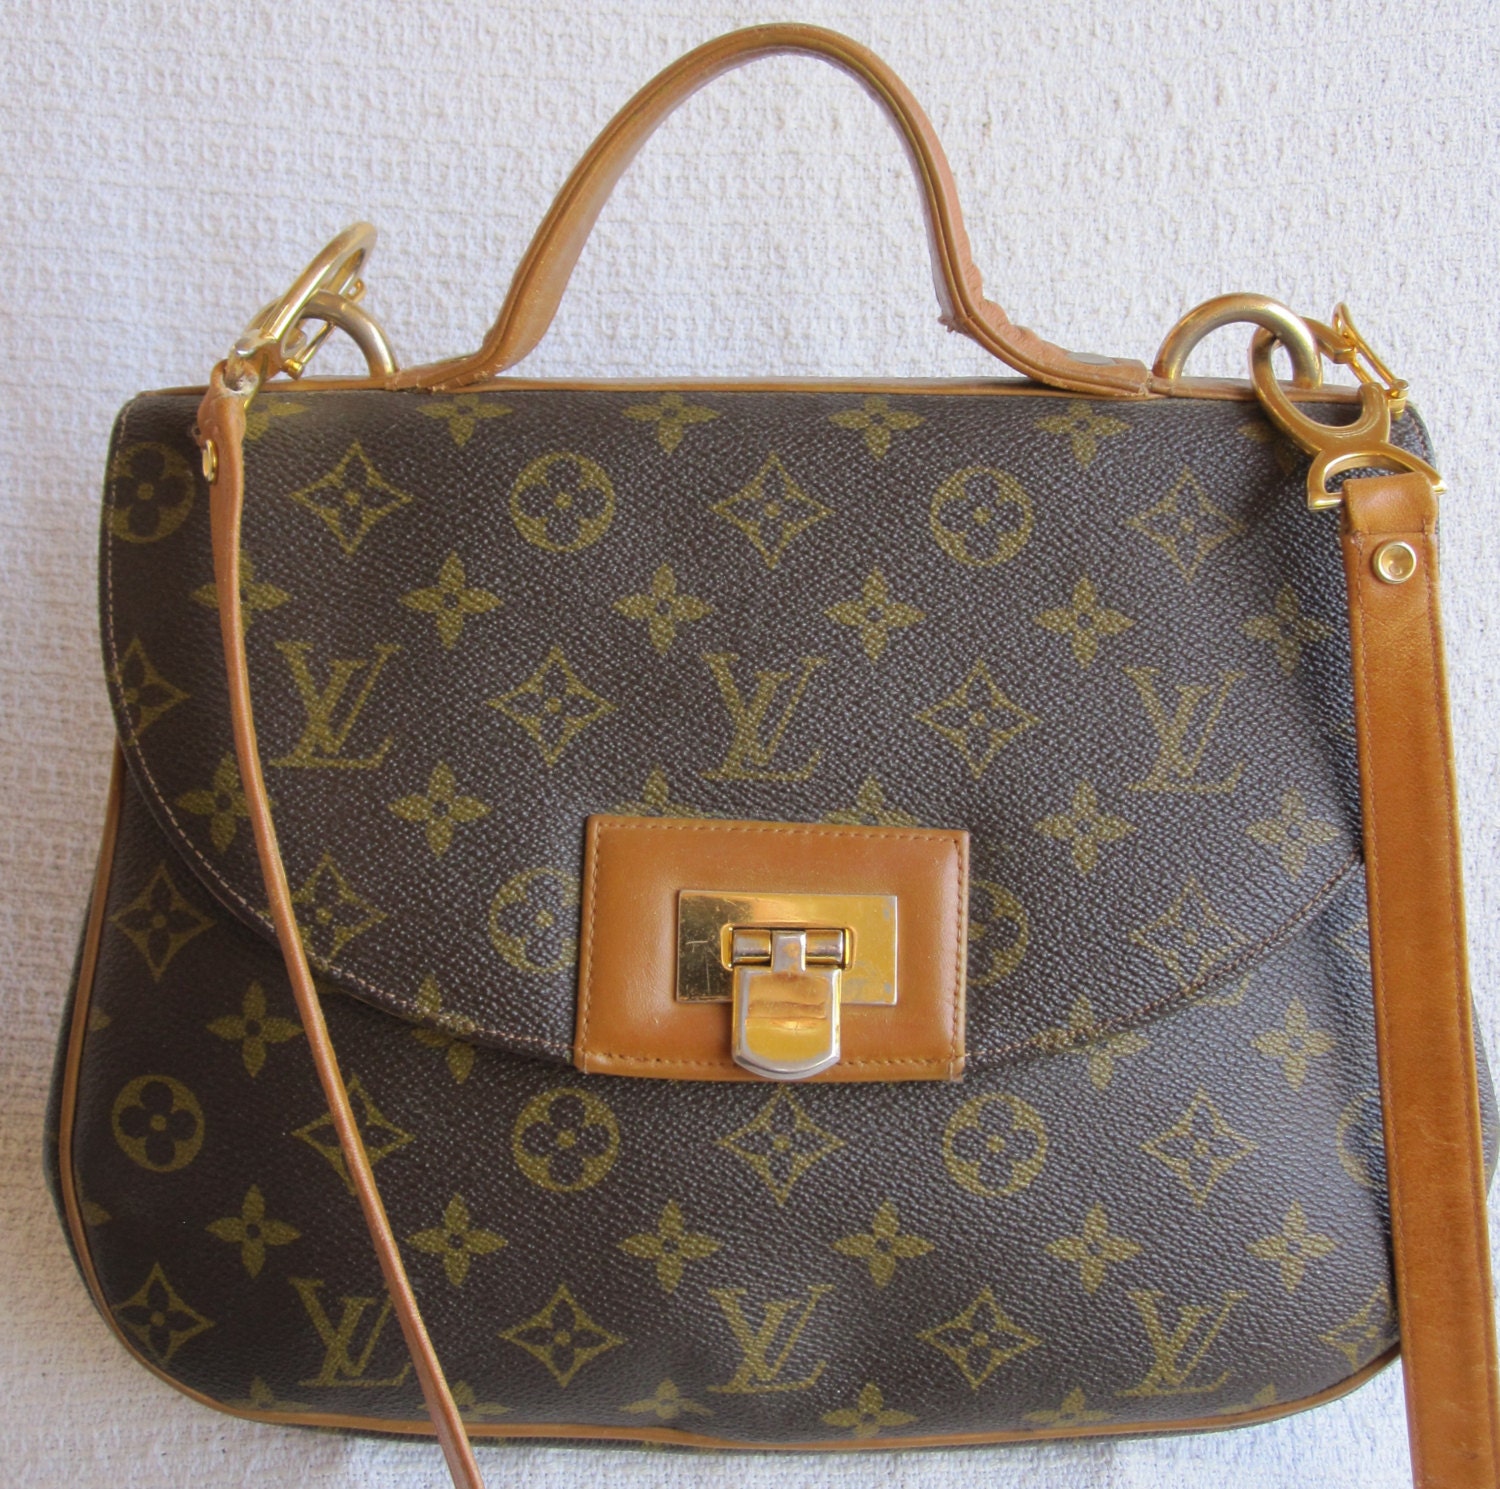 Stunning Rare Louis Vuitton vitnage french company made in